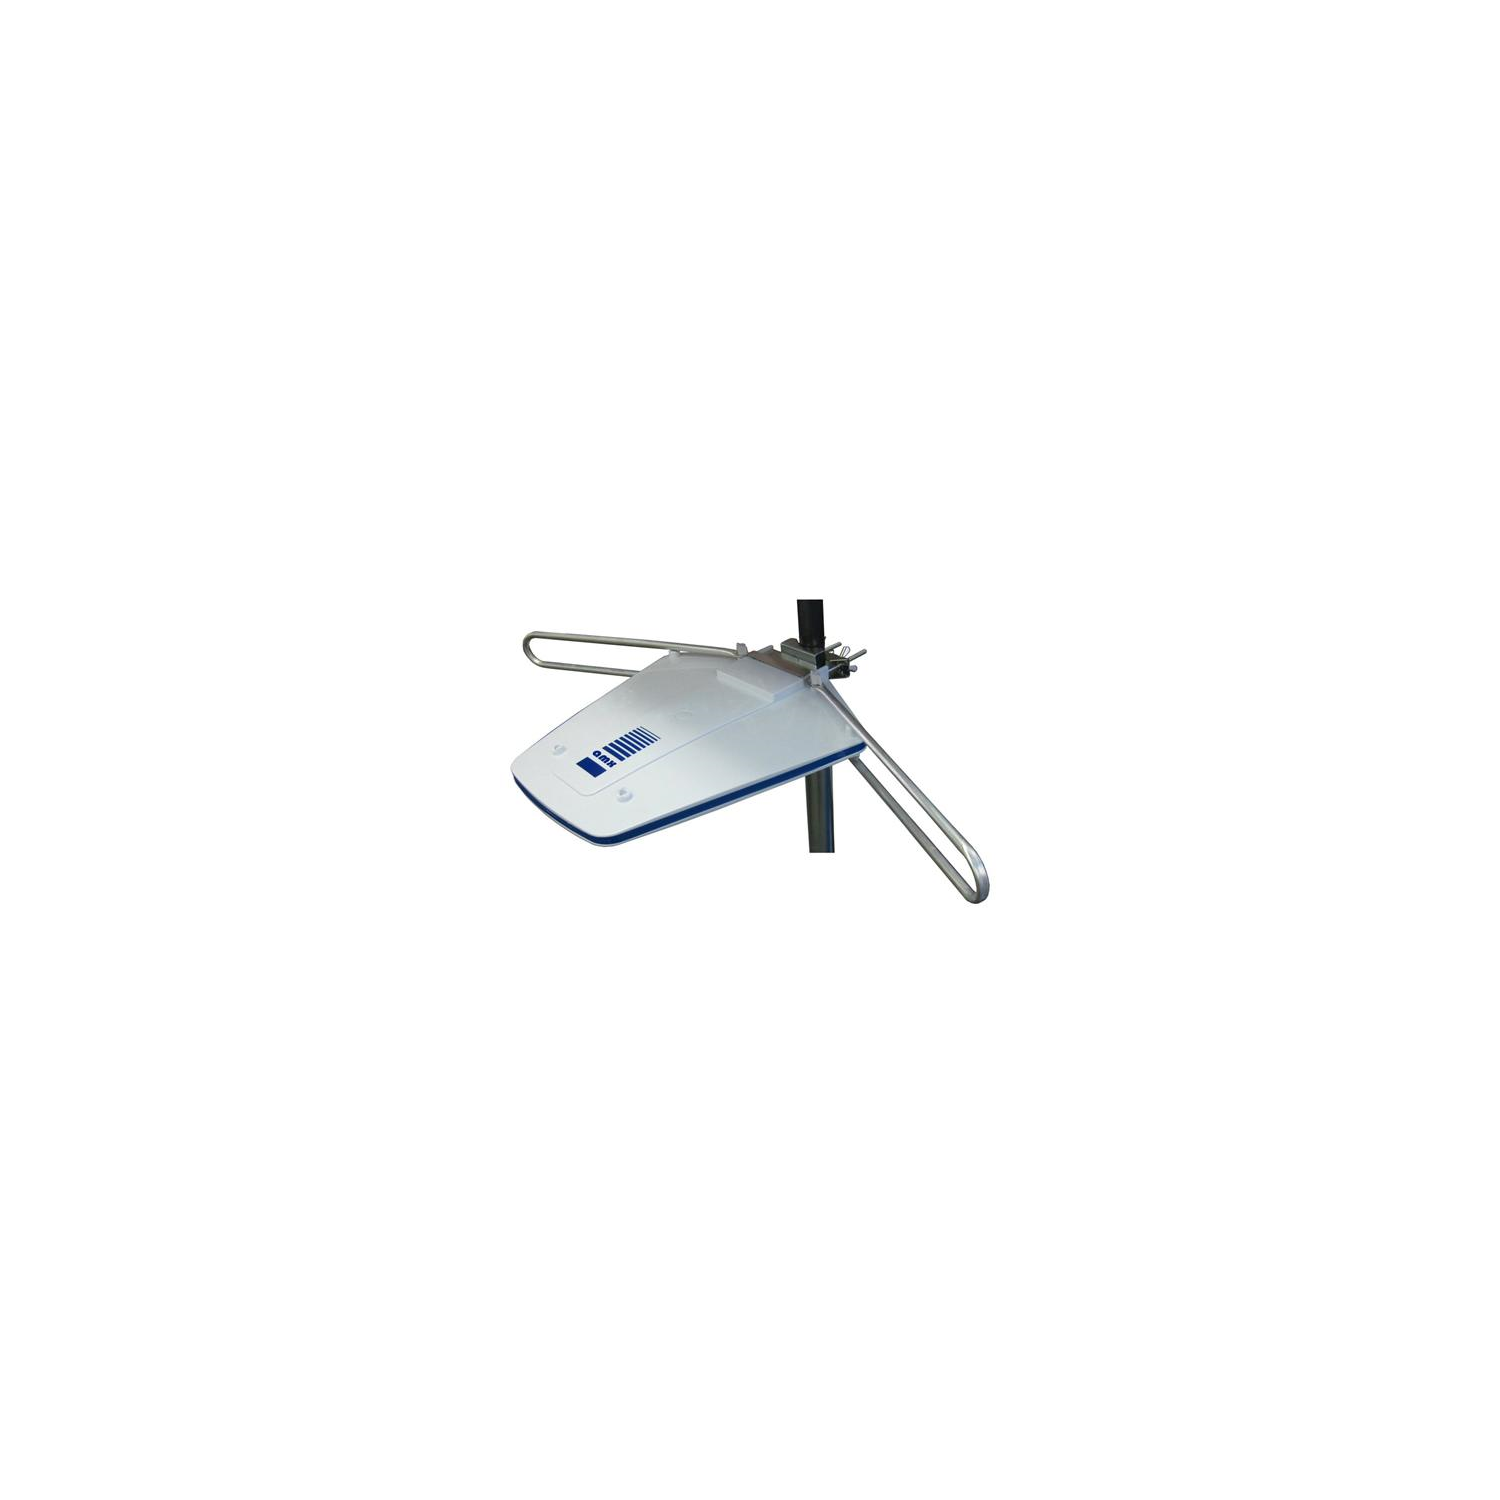 AMX Outdoor Amplified Antenna with 2 Outputs for TV or FM Radio HDTV ATSC VHF and UHF Signals